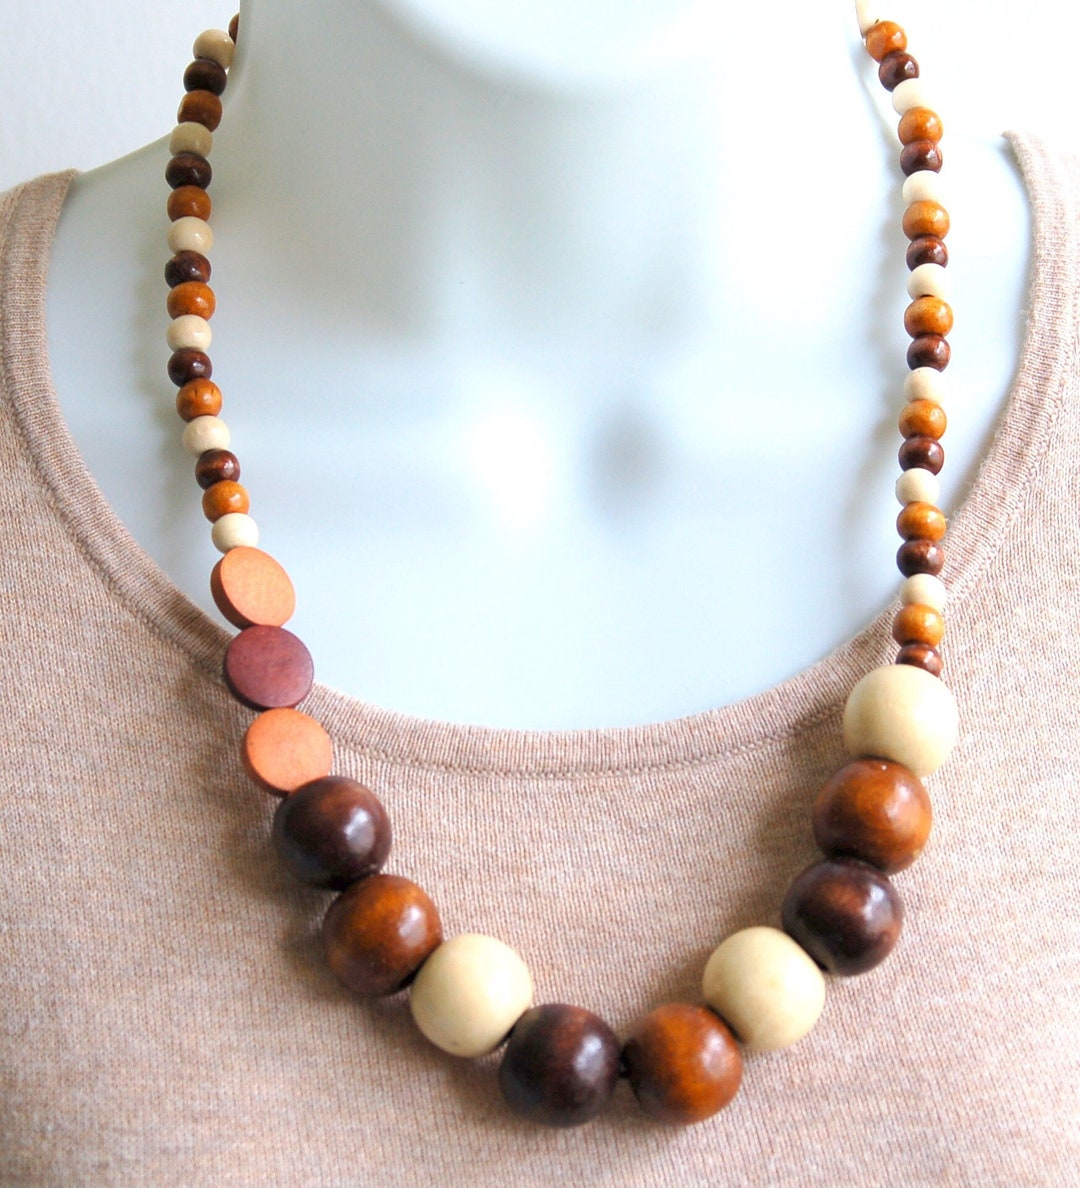 Chunky Round Wooden Bead Necklace/ Brown - 60cm L | eBay